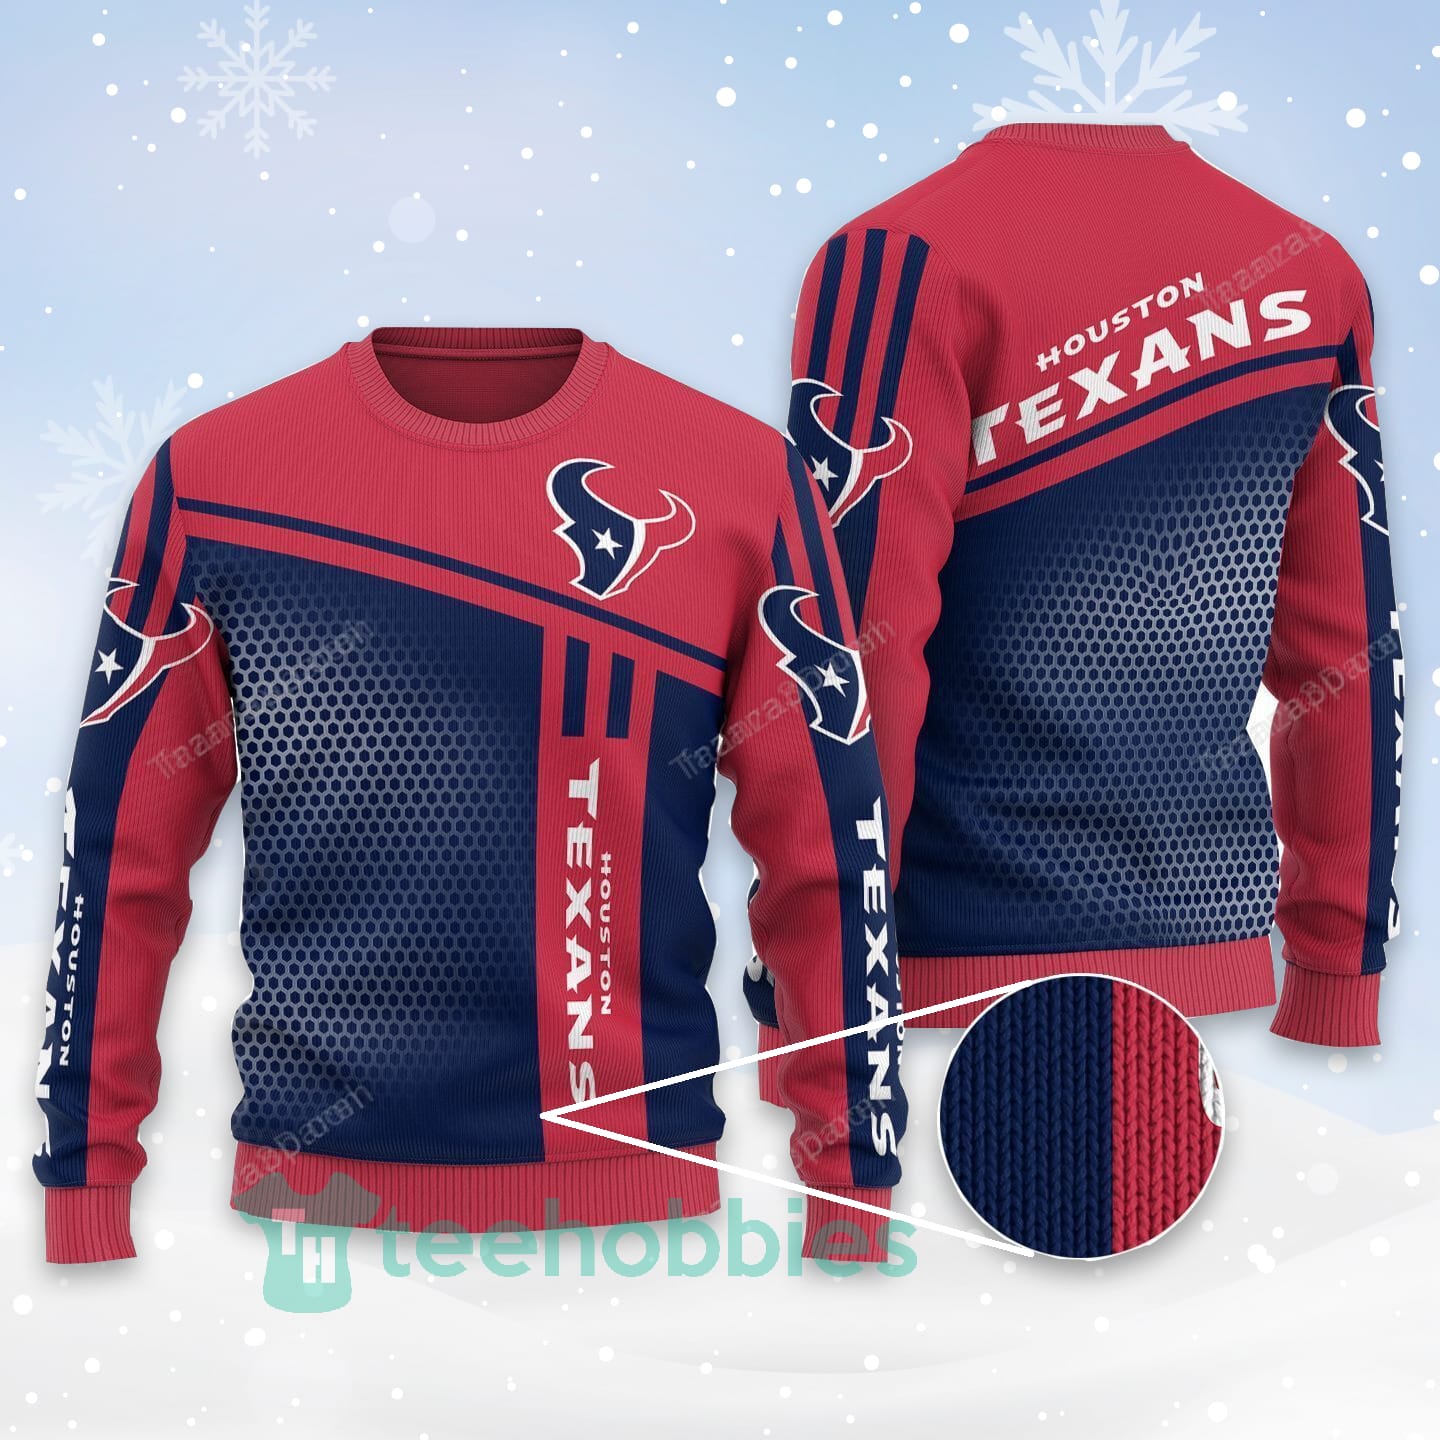 Houston Texans All Over Printed Christmas Sweater For Fans